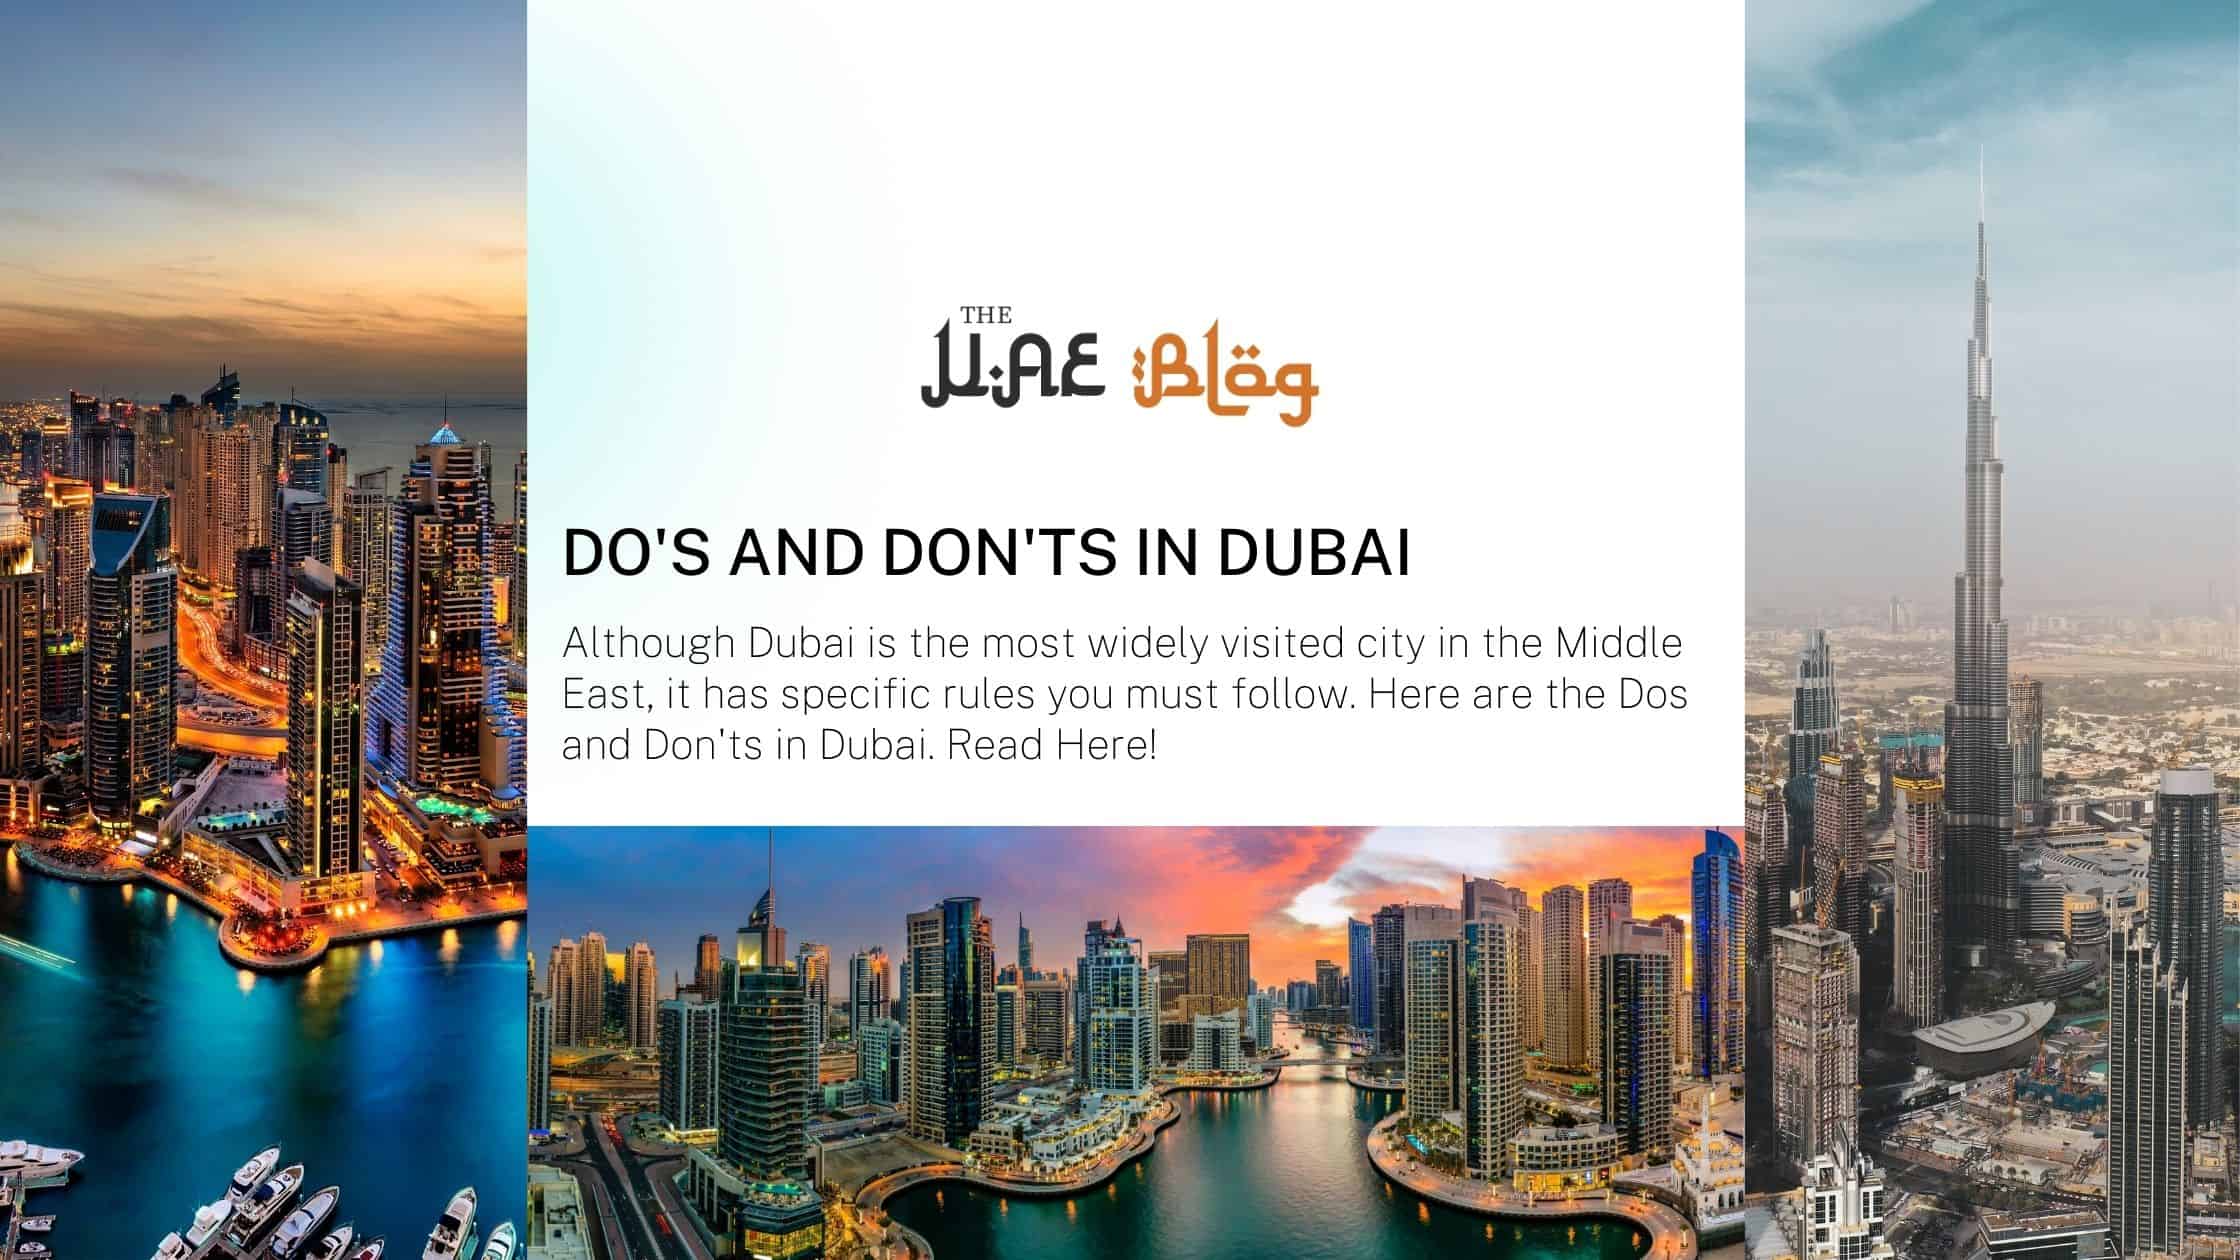 Do's and don'ts in Dubai